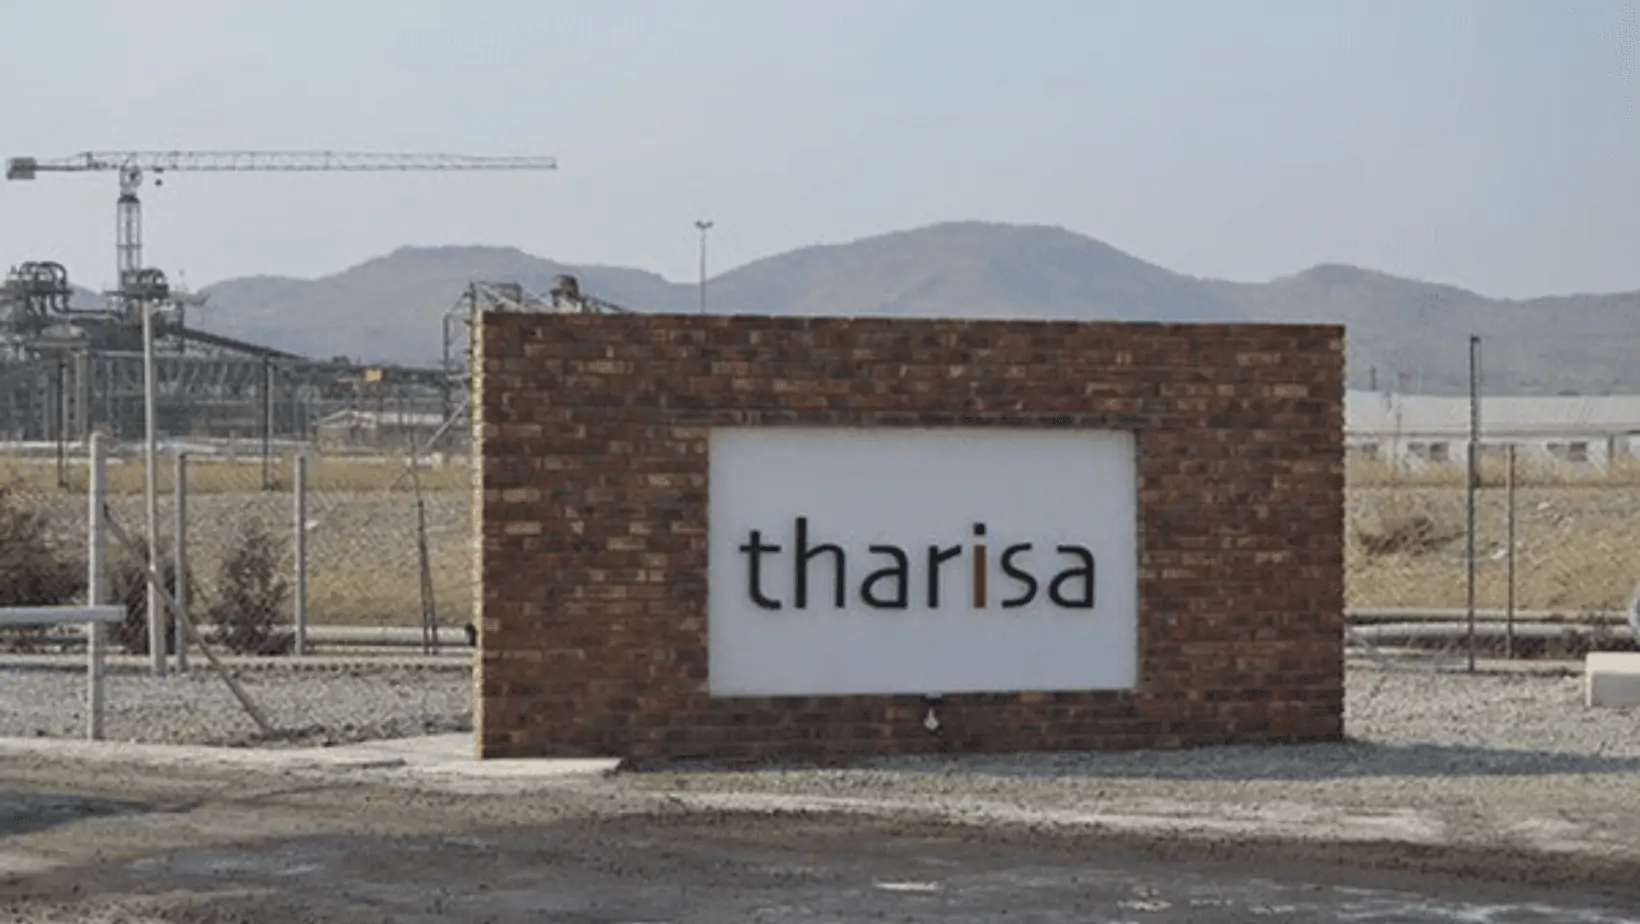 Tharisa plc’s Share Repurchase Program: A Strategic Move in the Mining Sector